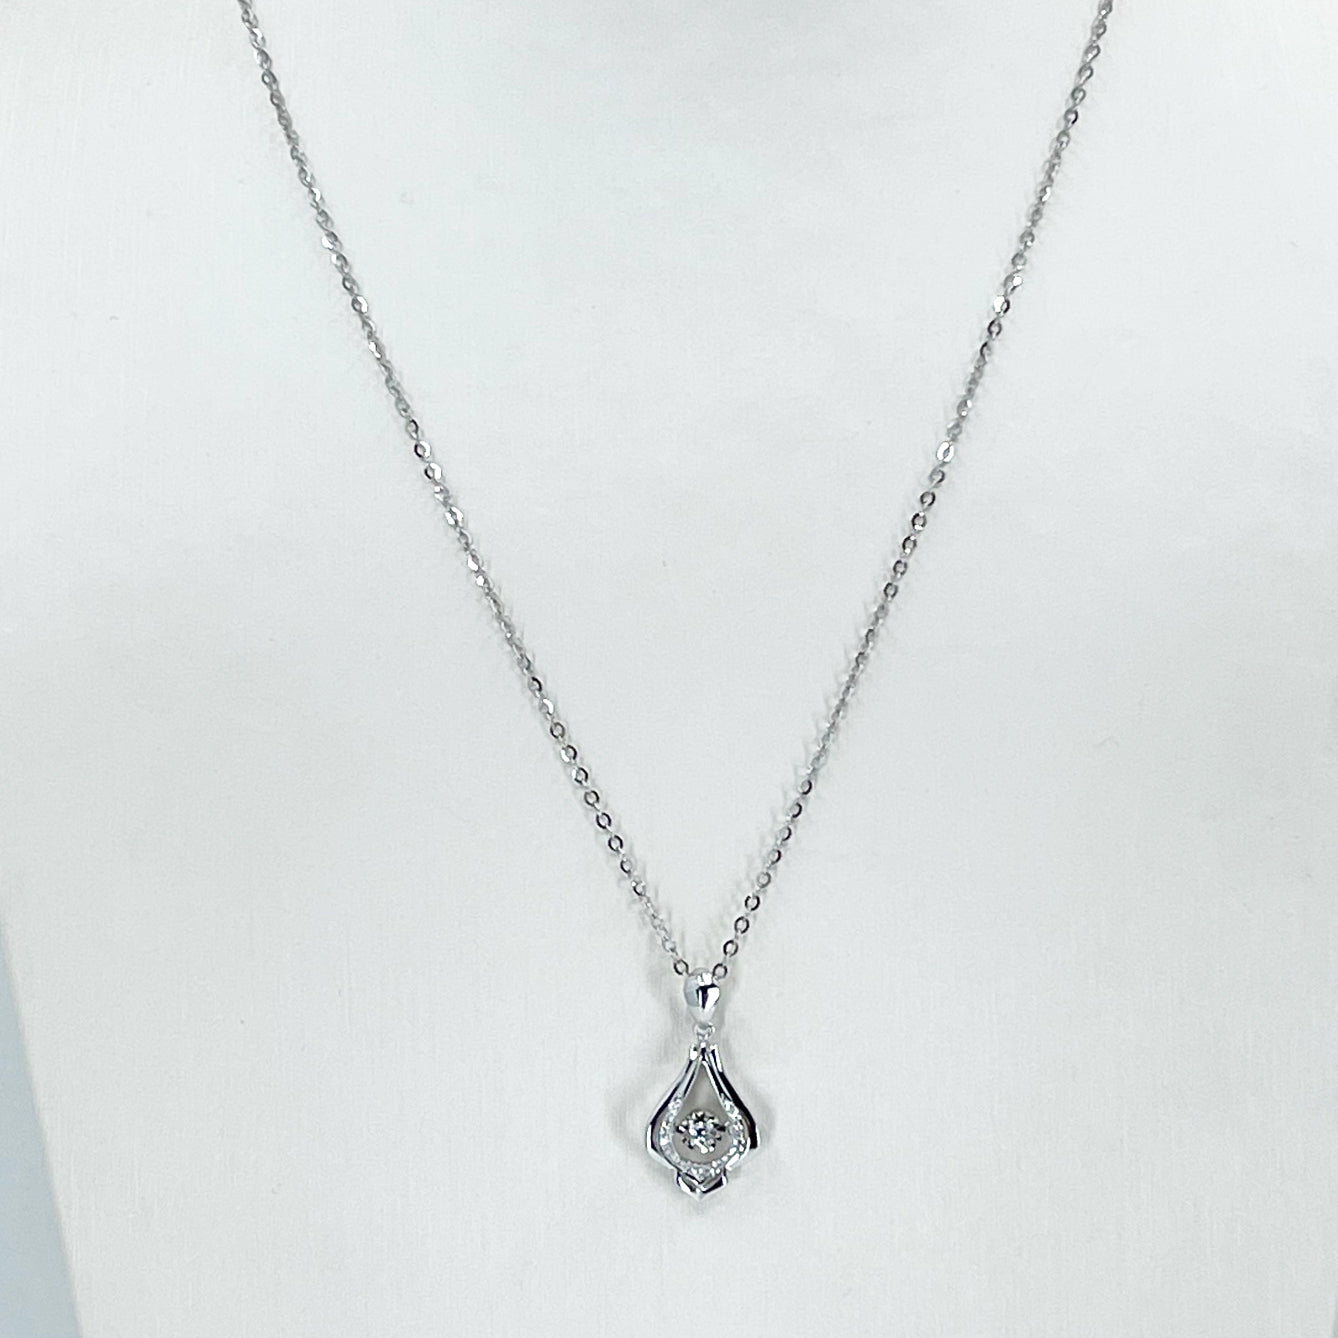 18K Solid White Gold Round Link Chain Necklace with Diamond Pendant 18